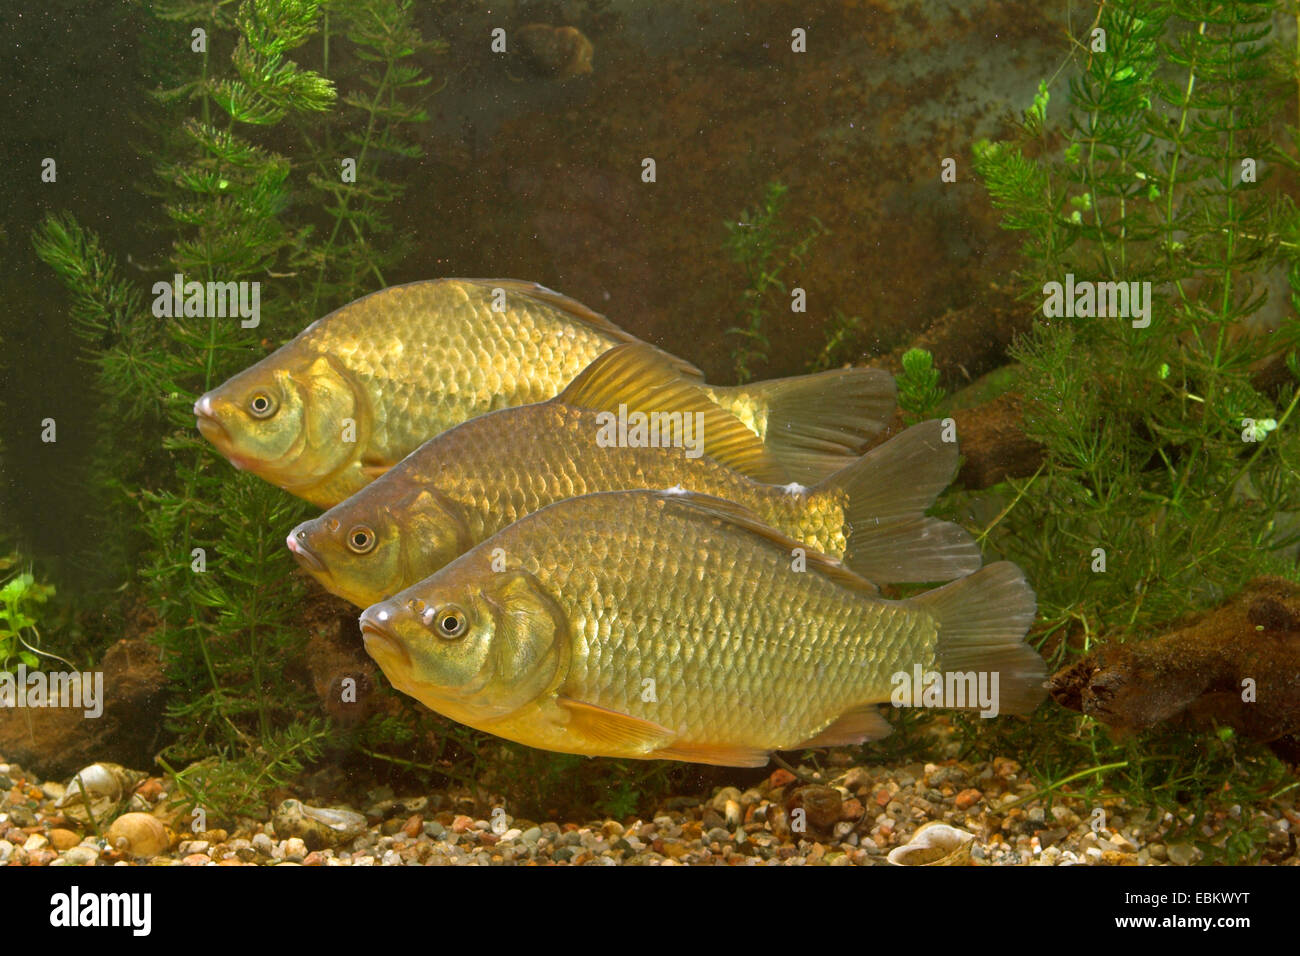 Crucian carp (Carassius carassius), three individuals one behind the other Stock Photo